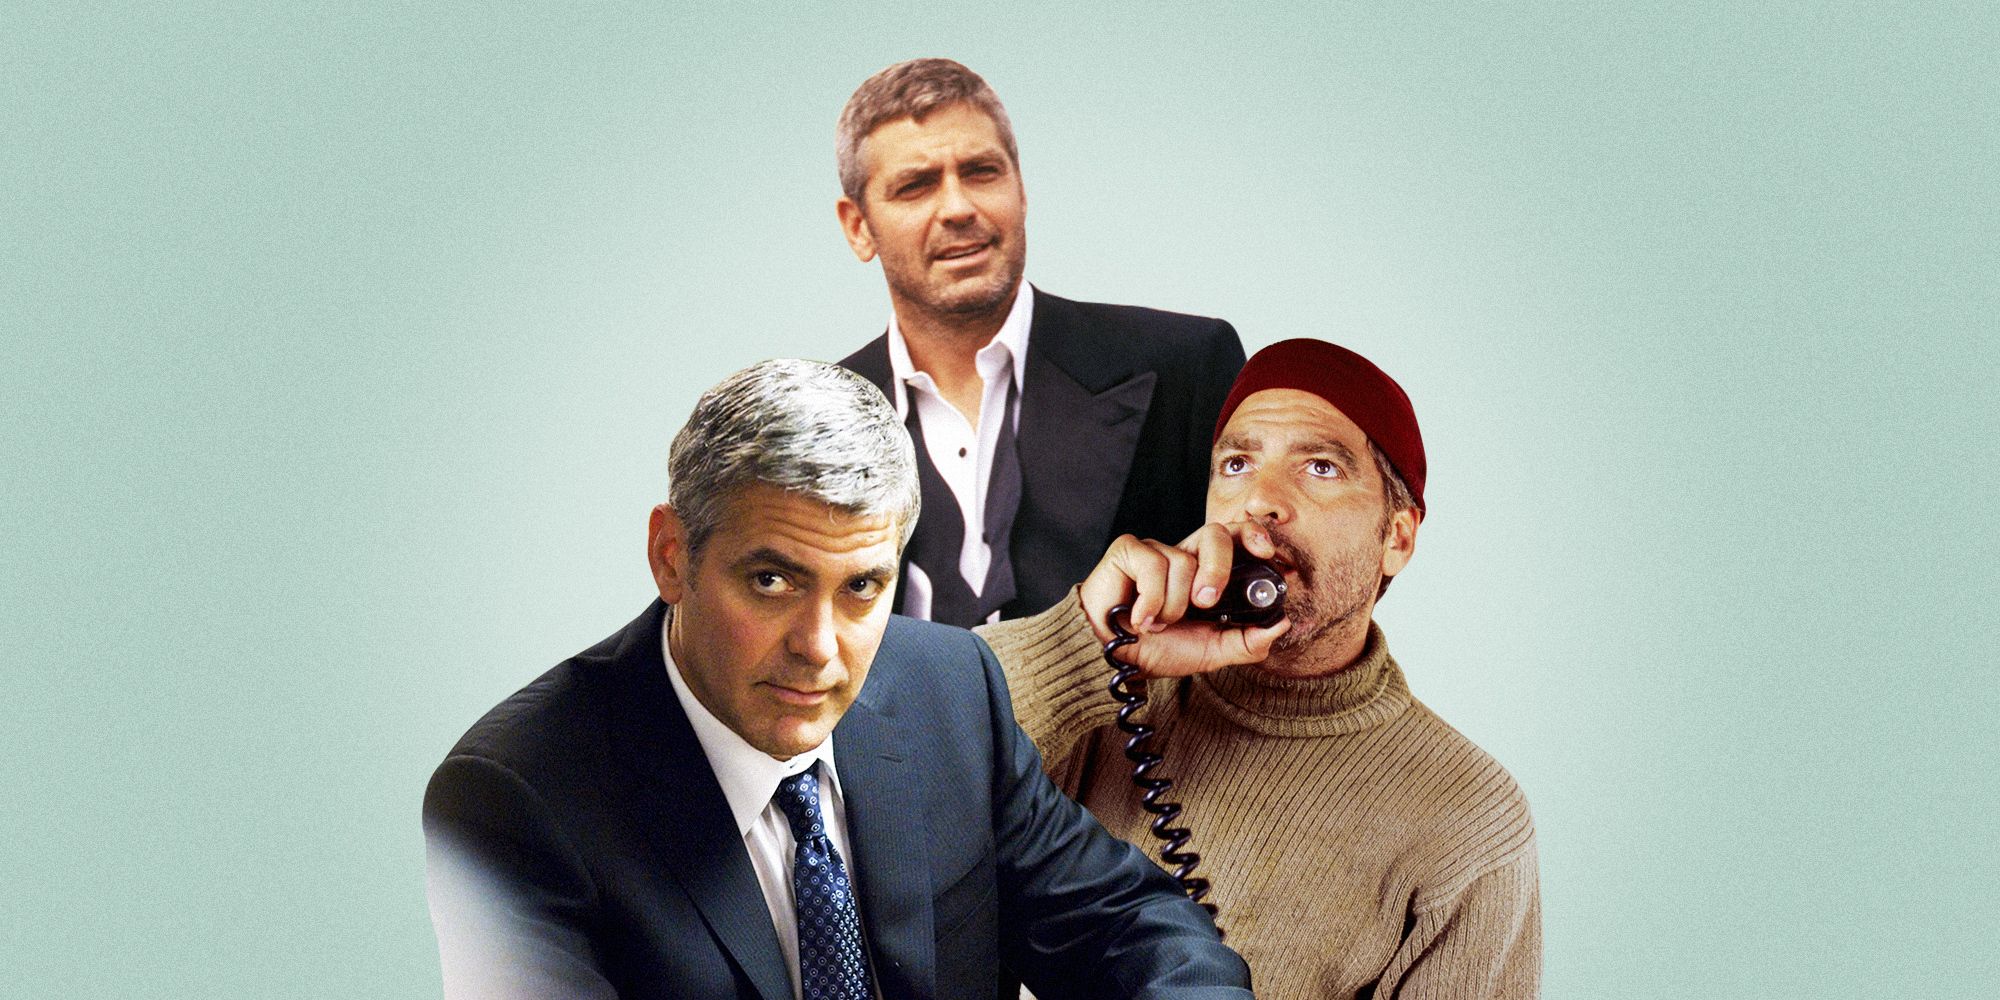 All 34 Best George Clooney Movies Ranked - The Greatest George Clooney  Movies to Watch